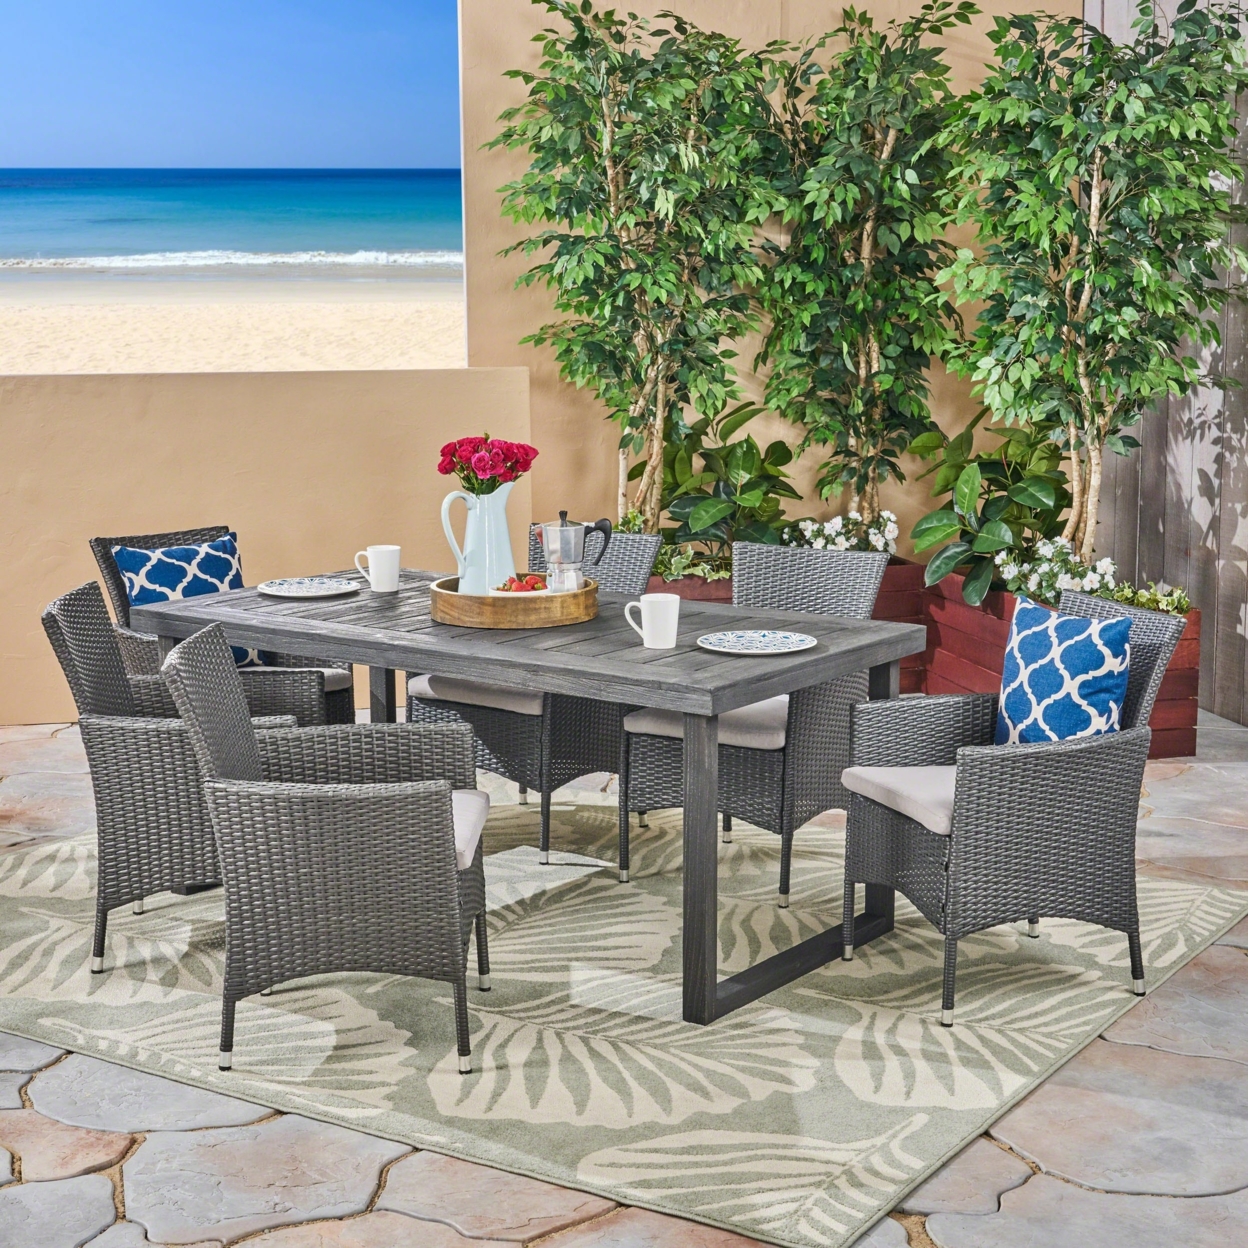 Agnes Outdoor 6-Seater Acacia Wood Dining Set With Wicker Chairs, Sandblast Dark Gray Finish And Gray And Silver